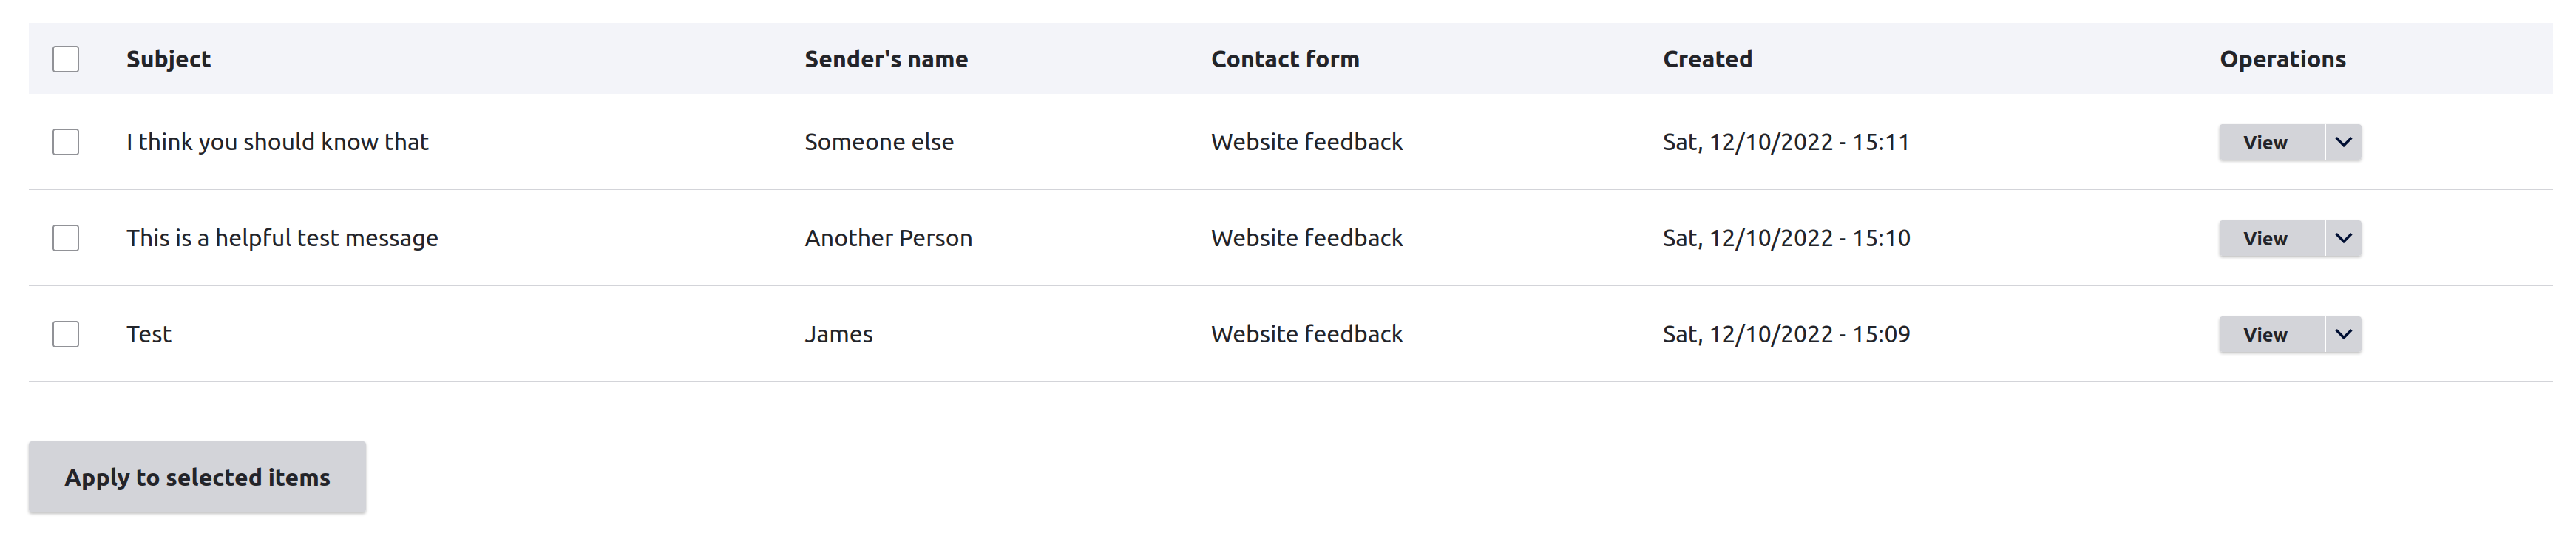 Viewing the submitted contact forms